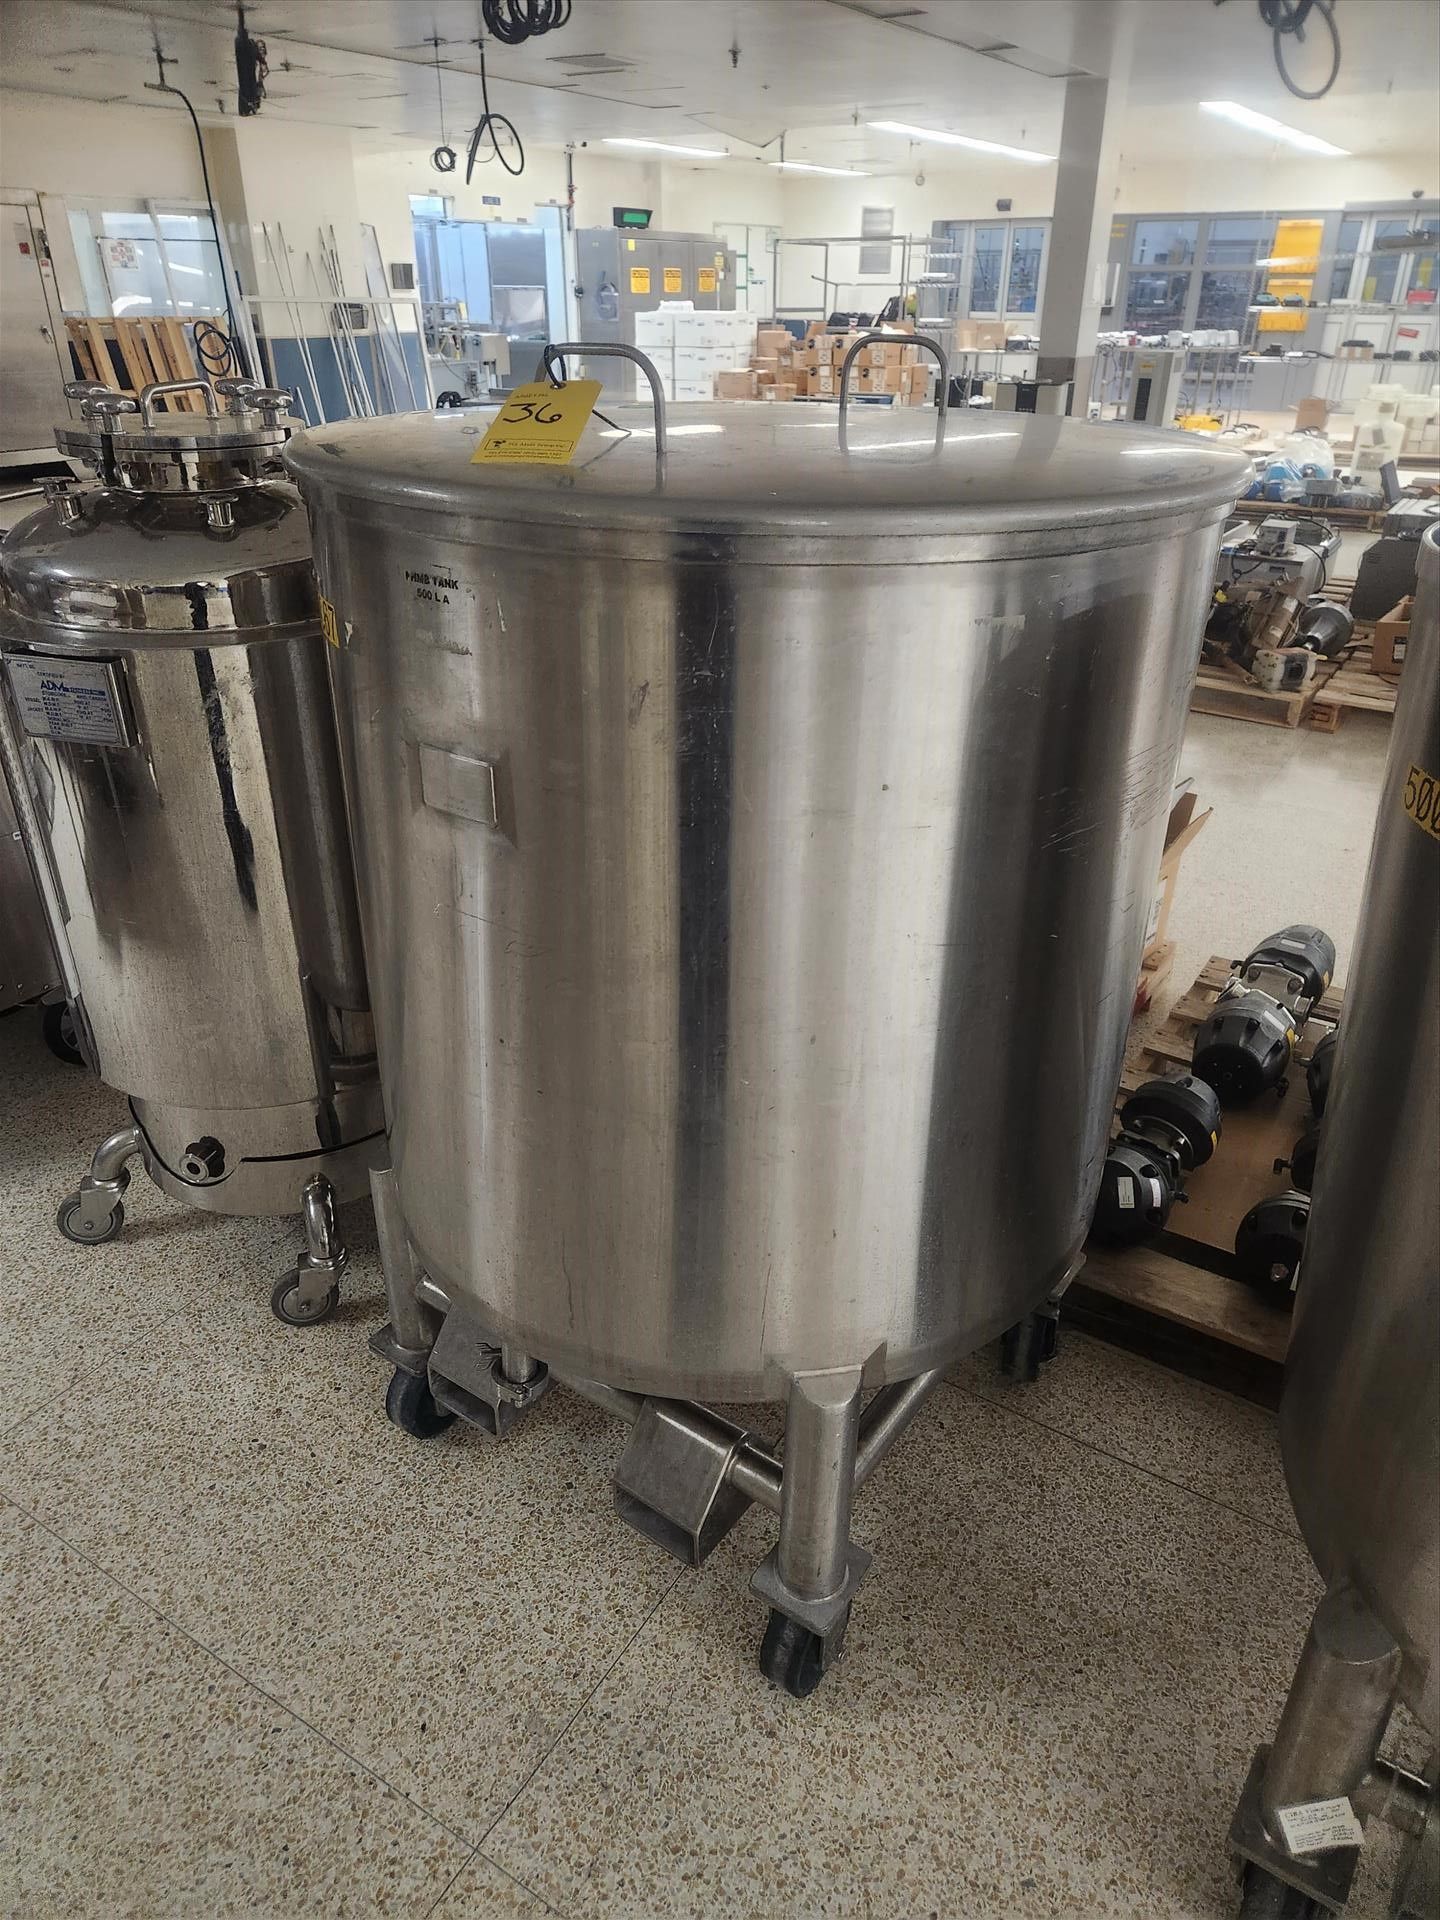 Inox tank, stainless steel, 500 L, open top w/ lid, bottom discharge, casters - Image 2 of 3